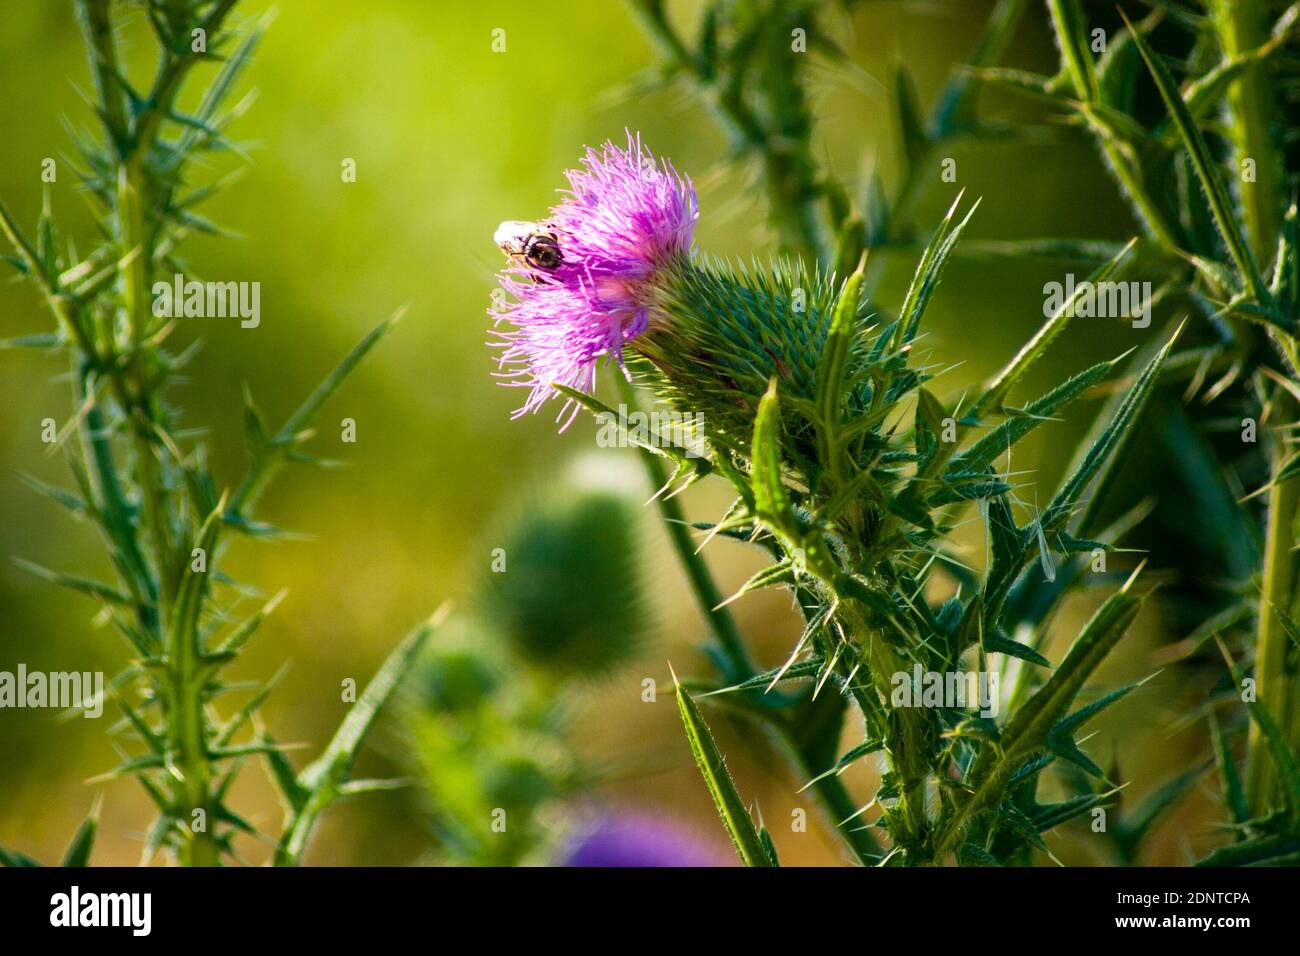 Blooming wild carduus crispus, the curly plumeless thistle or welted thistle, is a herb in the daisy family Asteraceae. Blured background. Outdoors Stock Photo